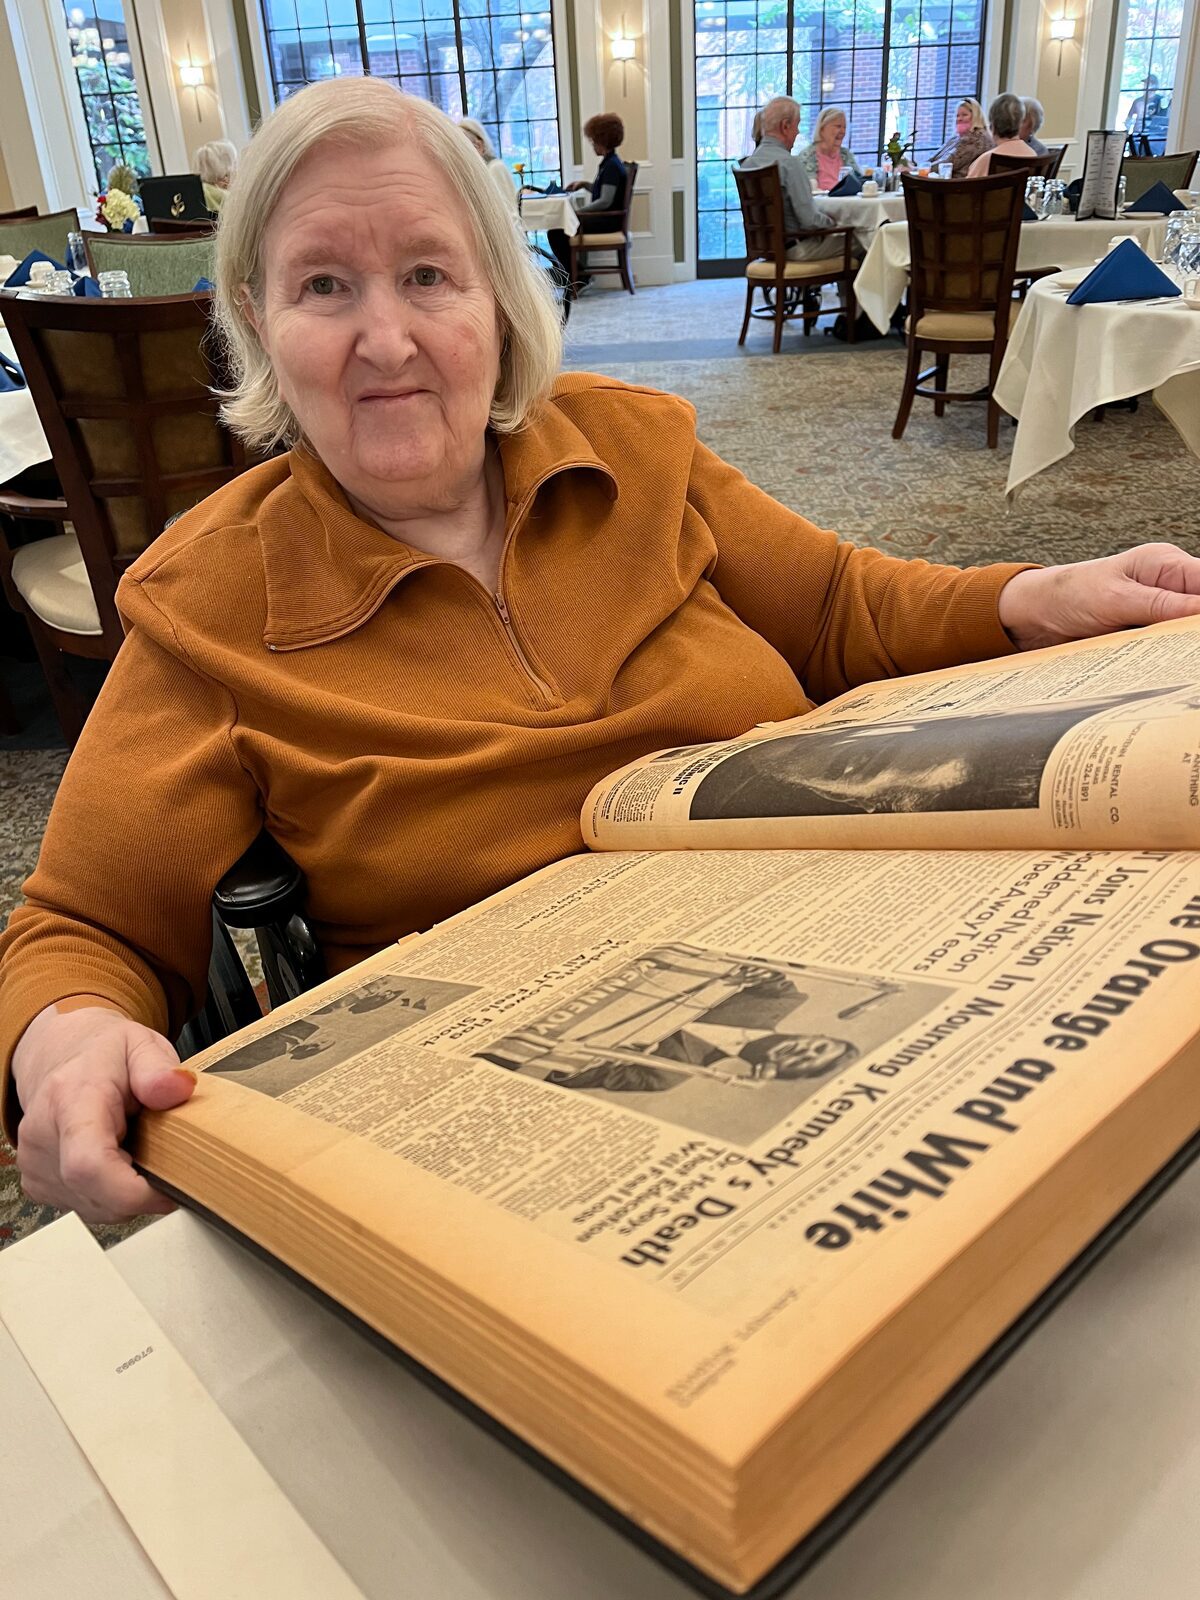 Linda Higgins wears an orange shirt as she sits at a desk and looks at archival copies of the Orange and White editions she helmed.